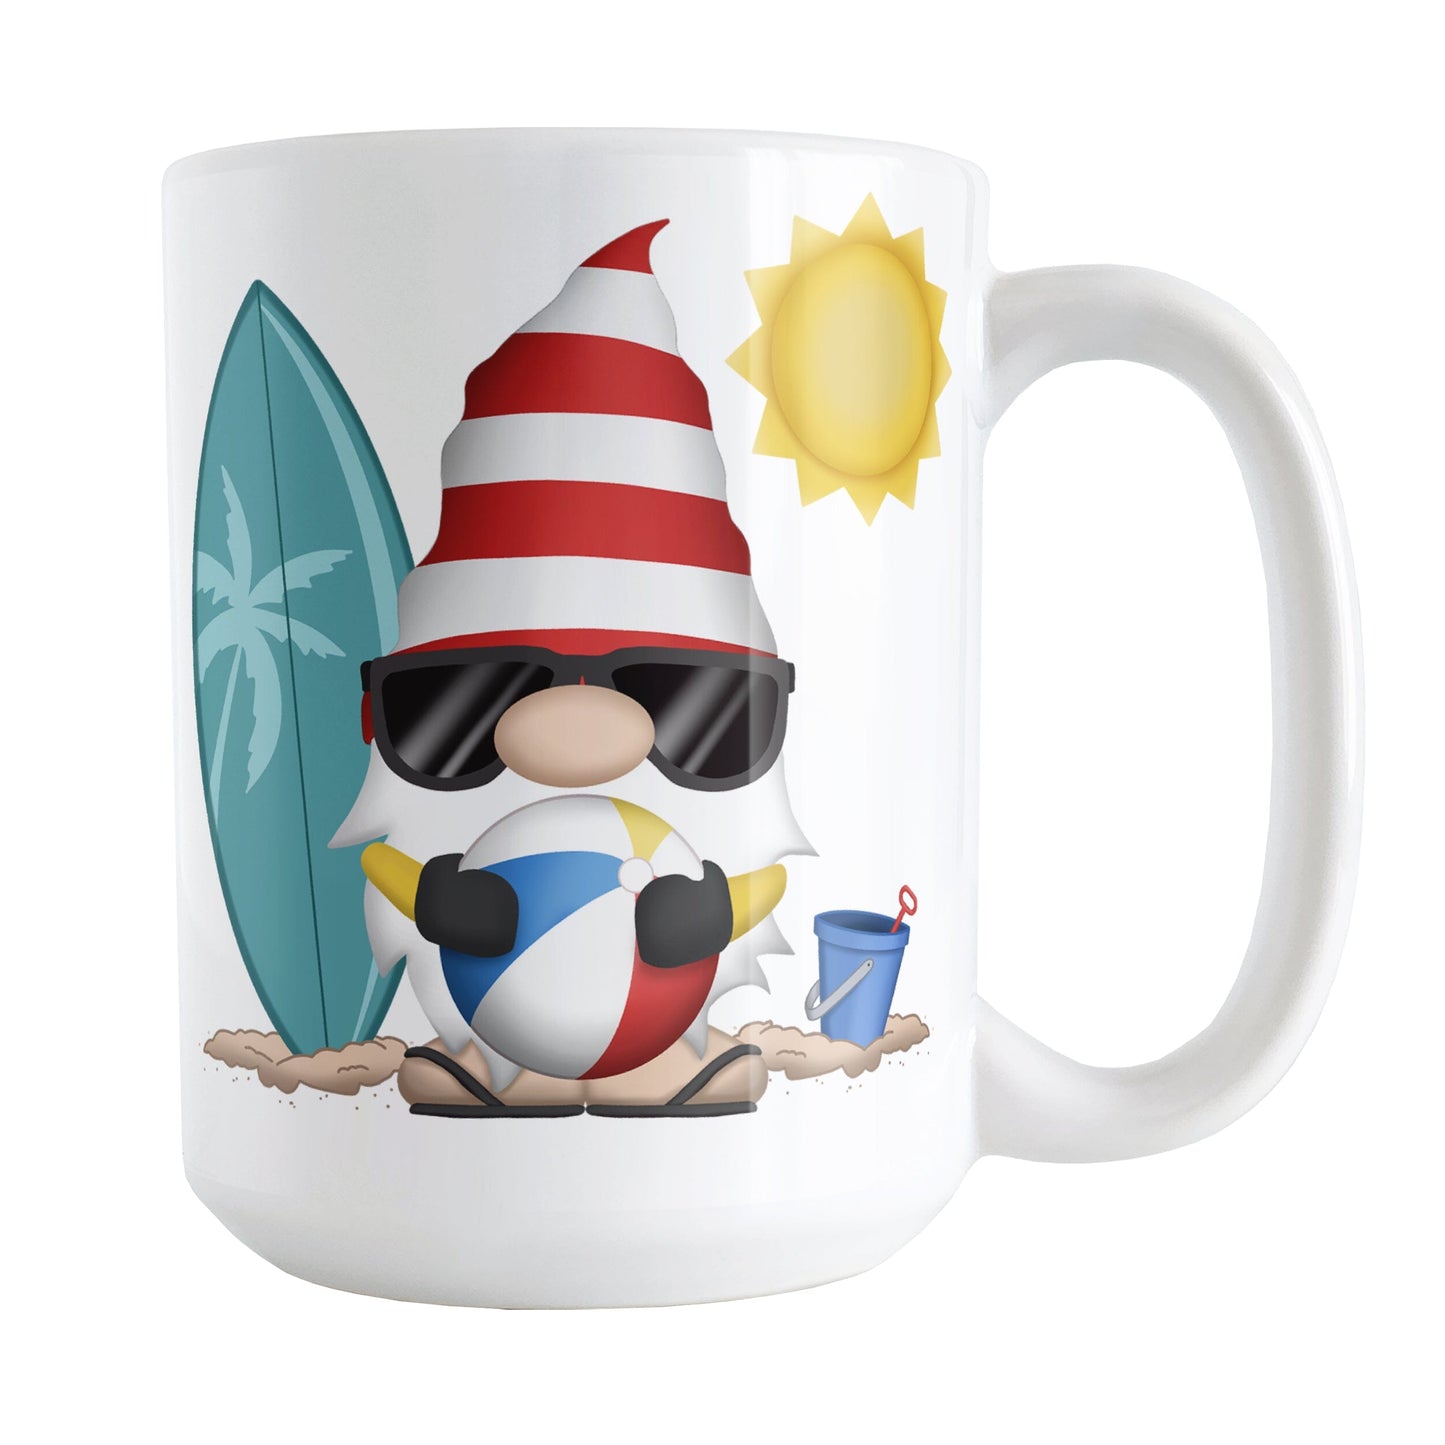 Summer Beach Gnome Mug (15oz) at Amy's Coffee Mugs. A ceramic coffee mug designed with an adorable gnome in sunglasses, holding a beach ball, with a surfboard and bucket in the sand on either side of him, and a bright yellow sun in the sky. This cute gnome is on both sides of the mug.